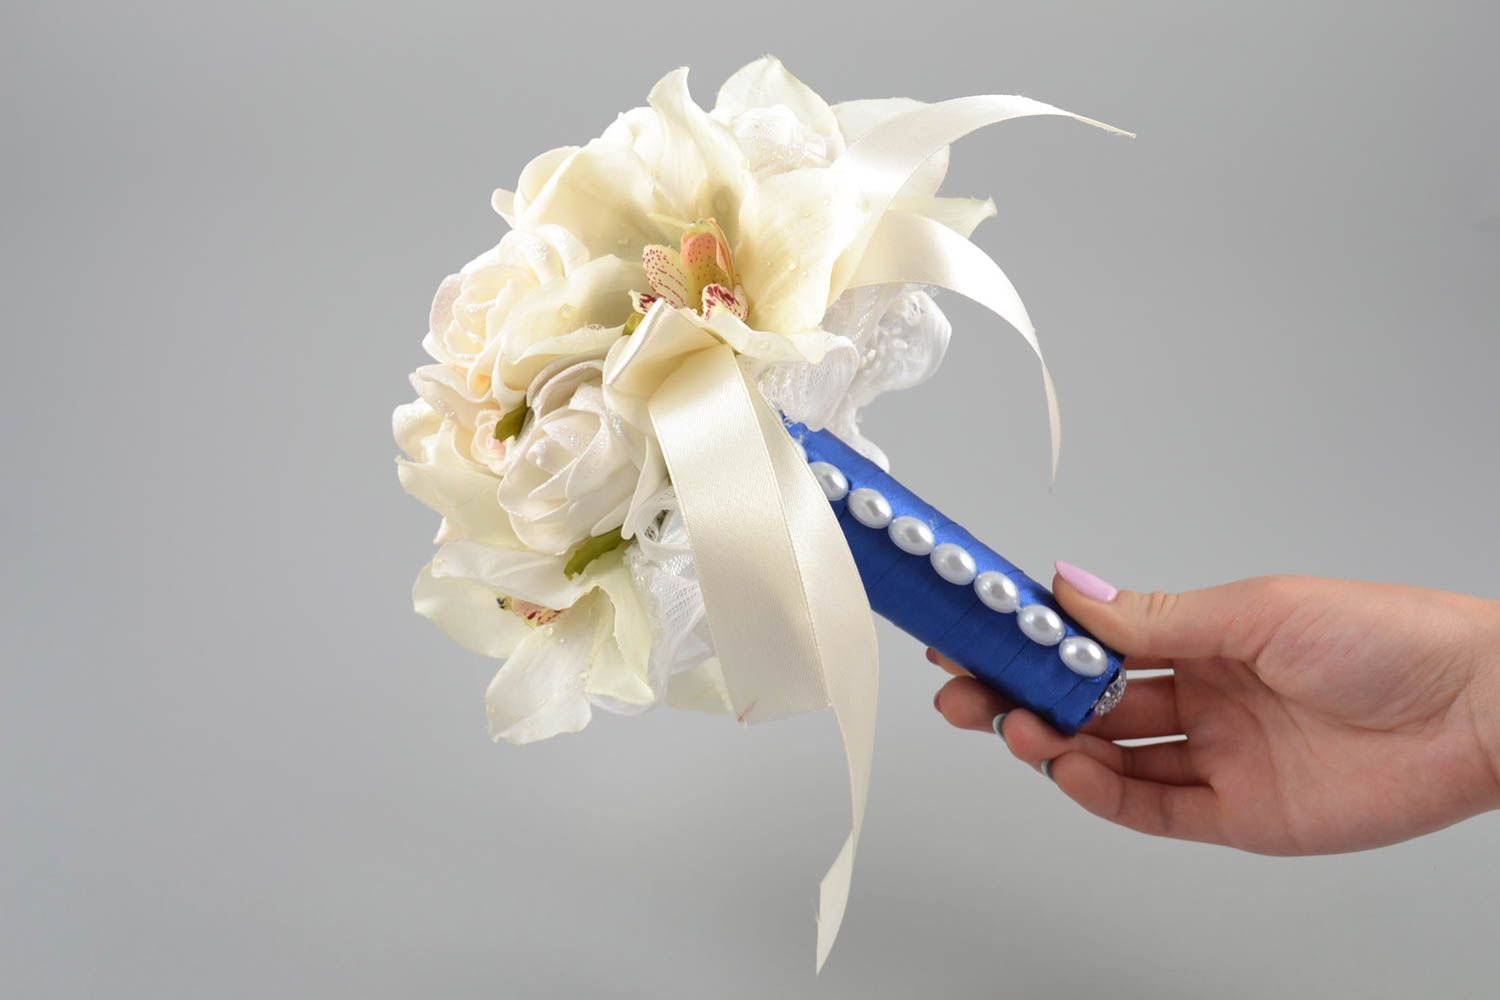 Handmade cute white wedding bouquet made of foamiran on blue stem with ribbons photo 5